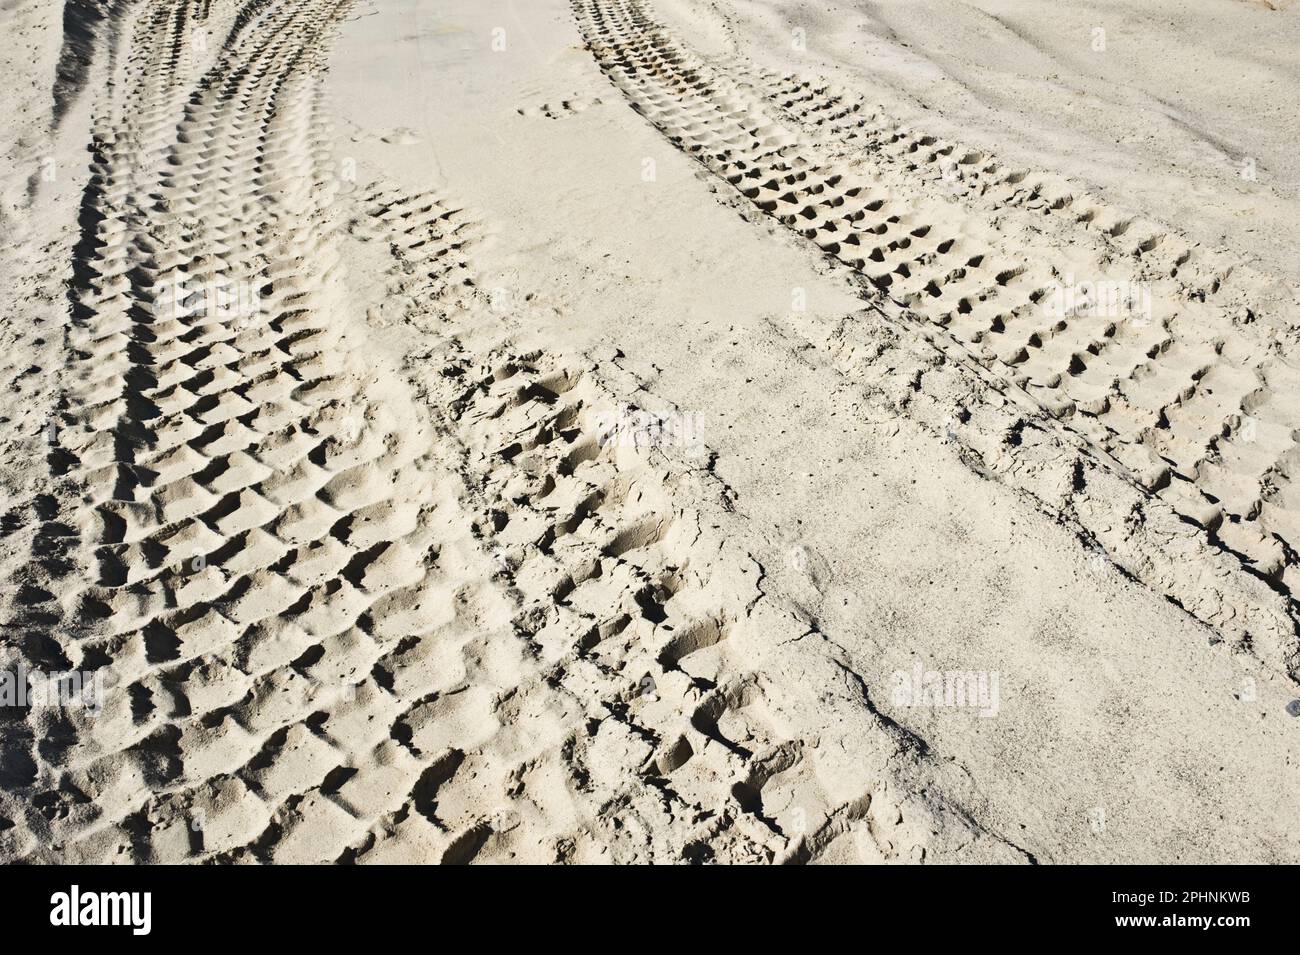 Tire tracks in the sand. Stock Photo